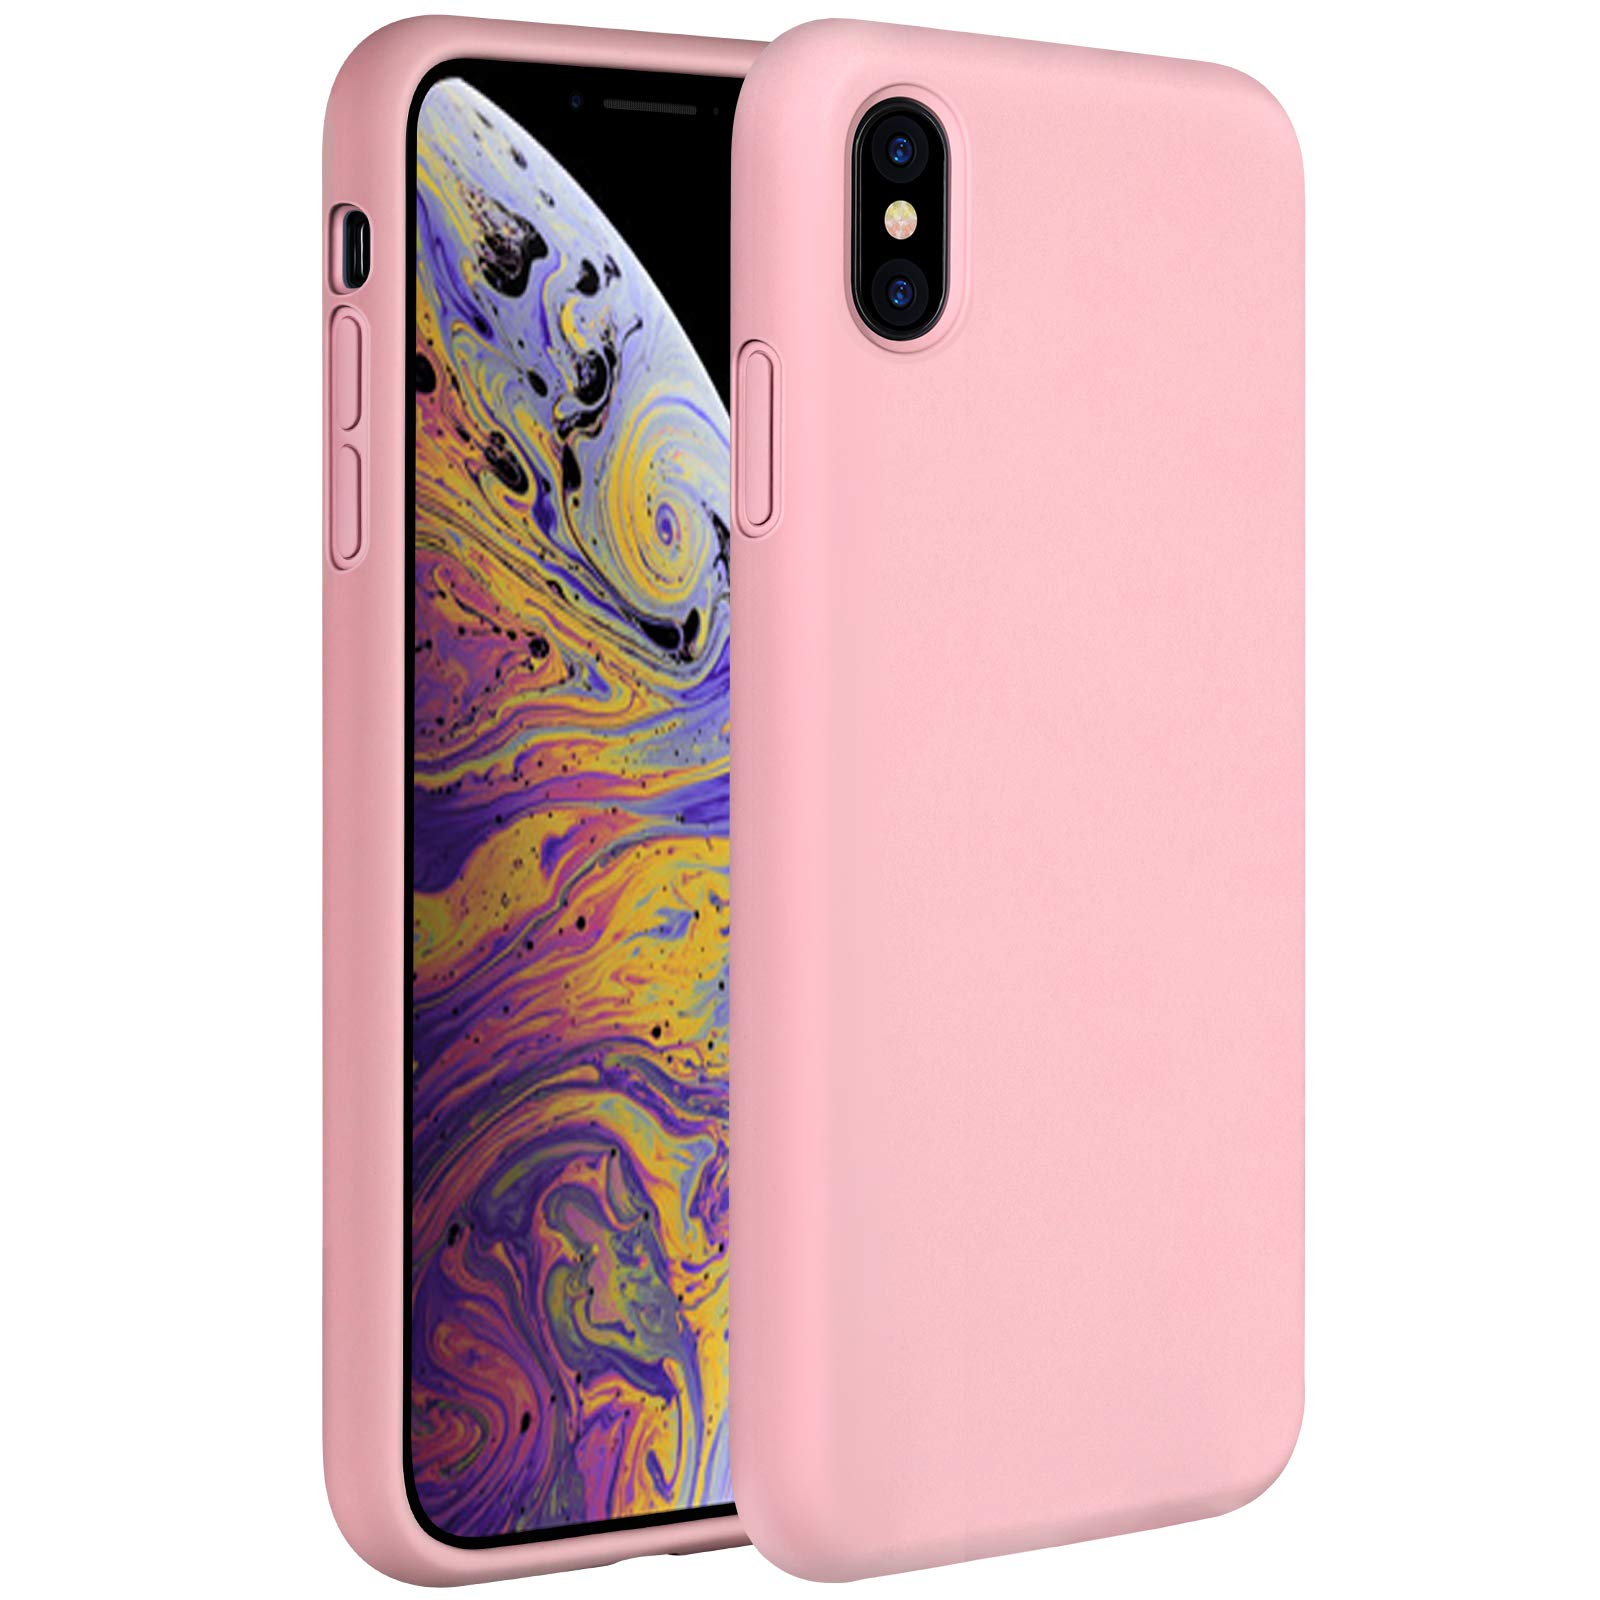 Book Cover Miracase Liquid Silicone Case Compatible with iPhone Xs Max 6.5 inch (2018), Gel Rubber Full Body Protection Shockproof Cover Case Drop Protection Case Pink